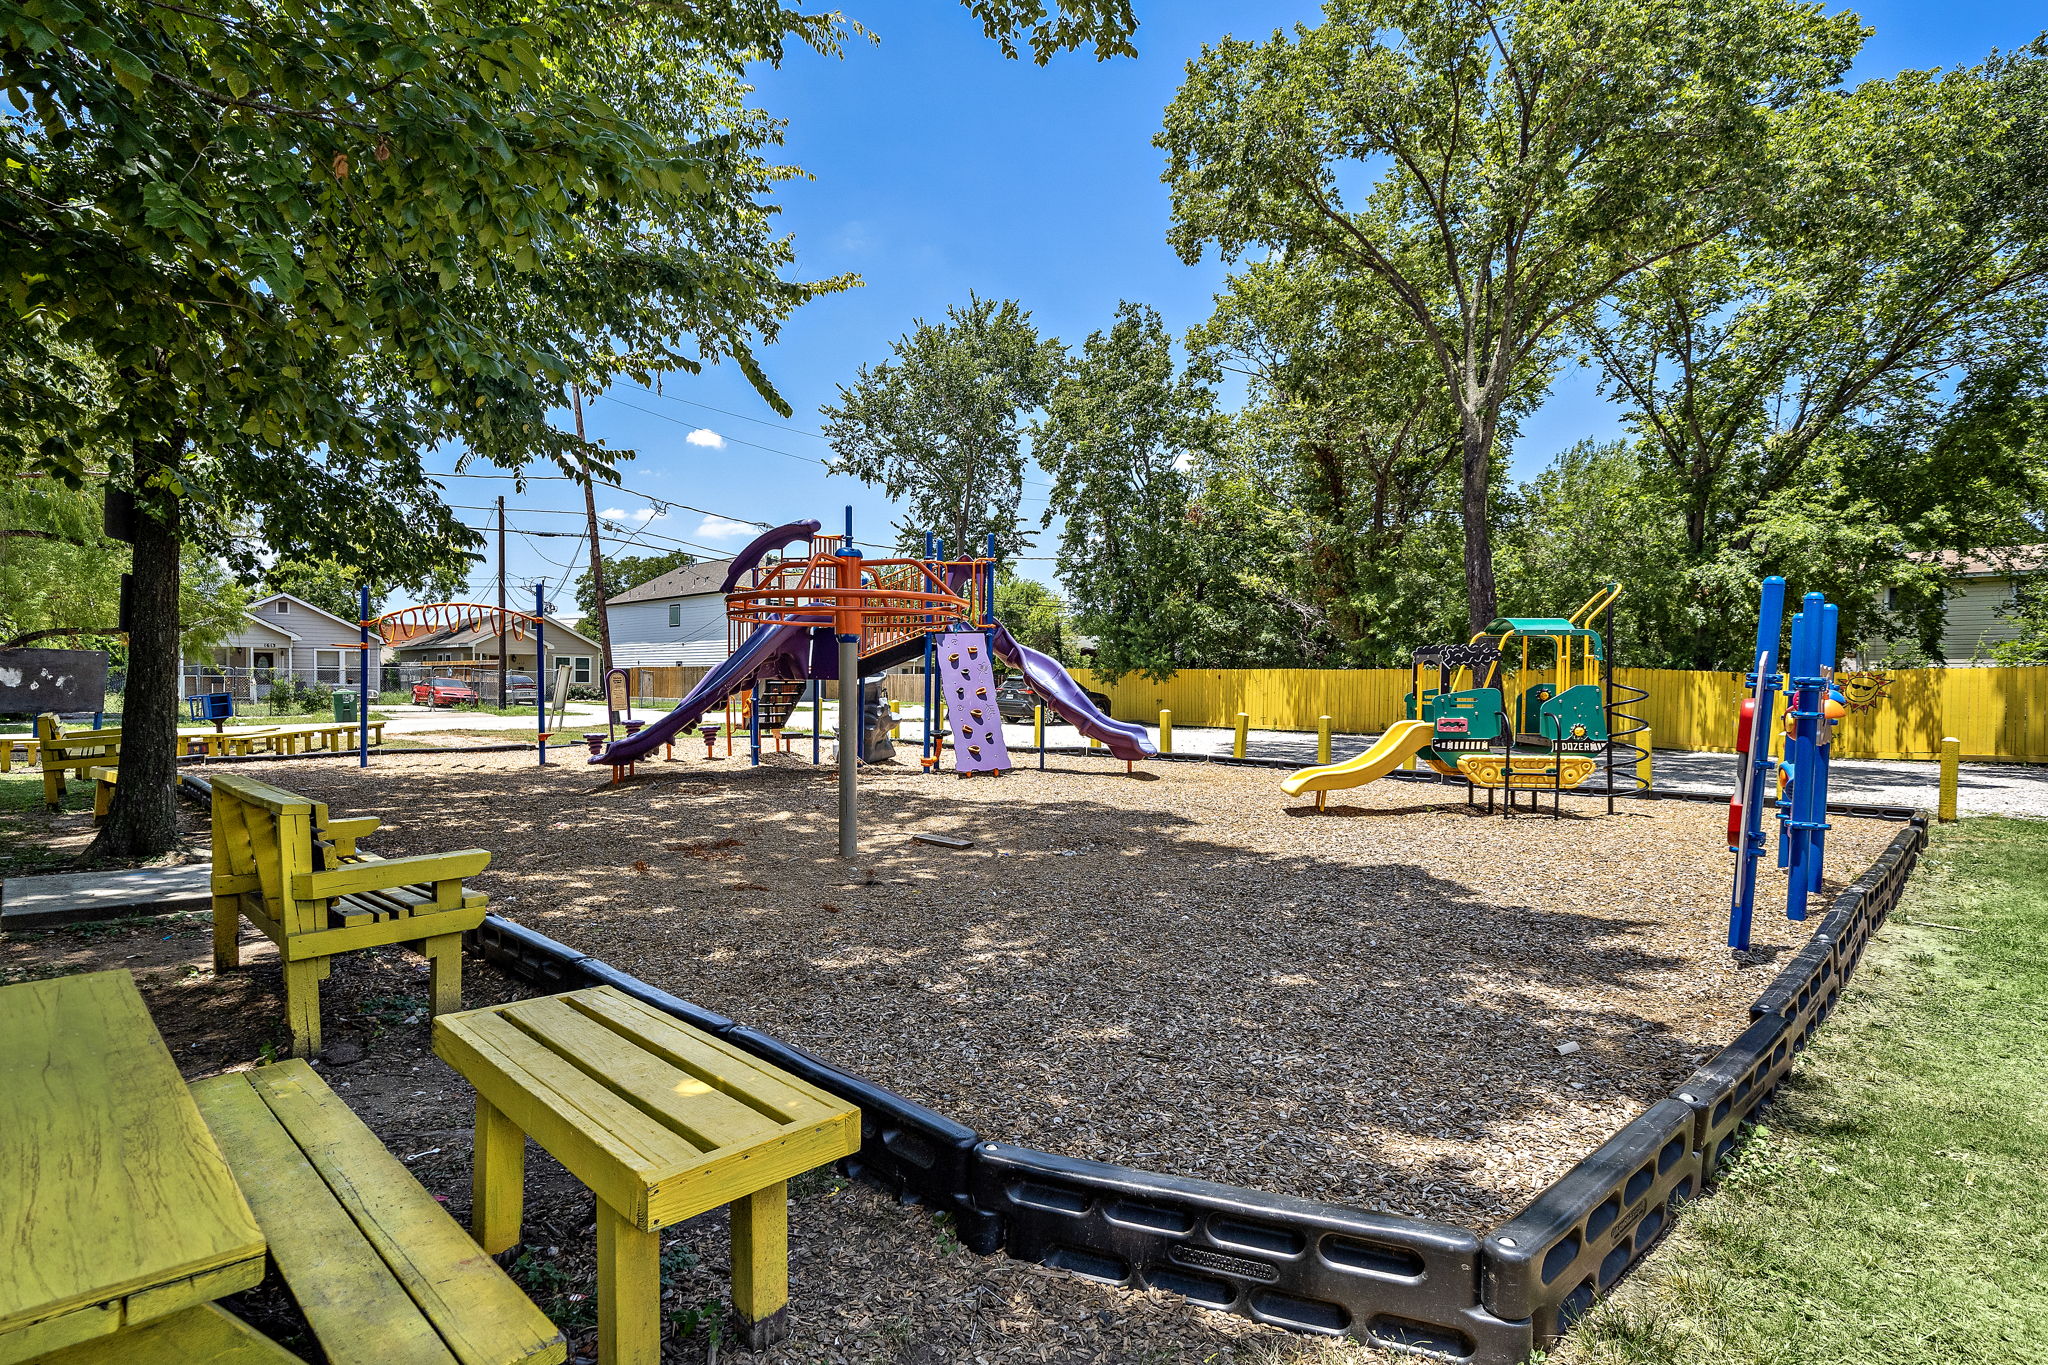 Jam Park playground with slides, monkey bar, and seating areas